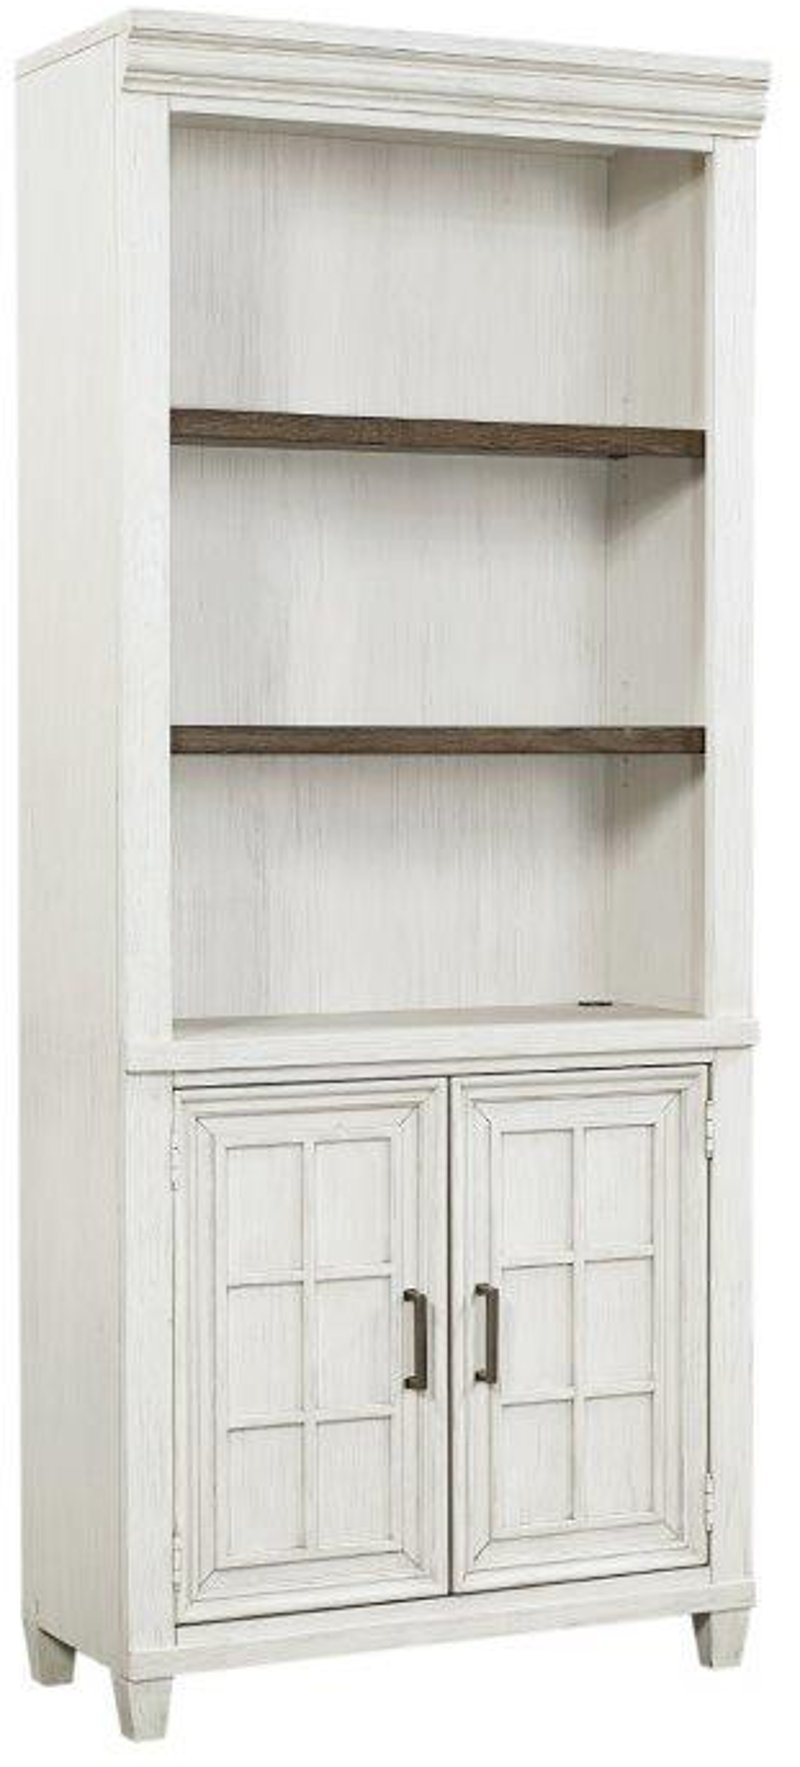 Caraway Antique White Bookcase With, Tall Shelves With Doors